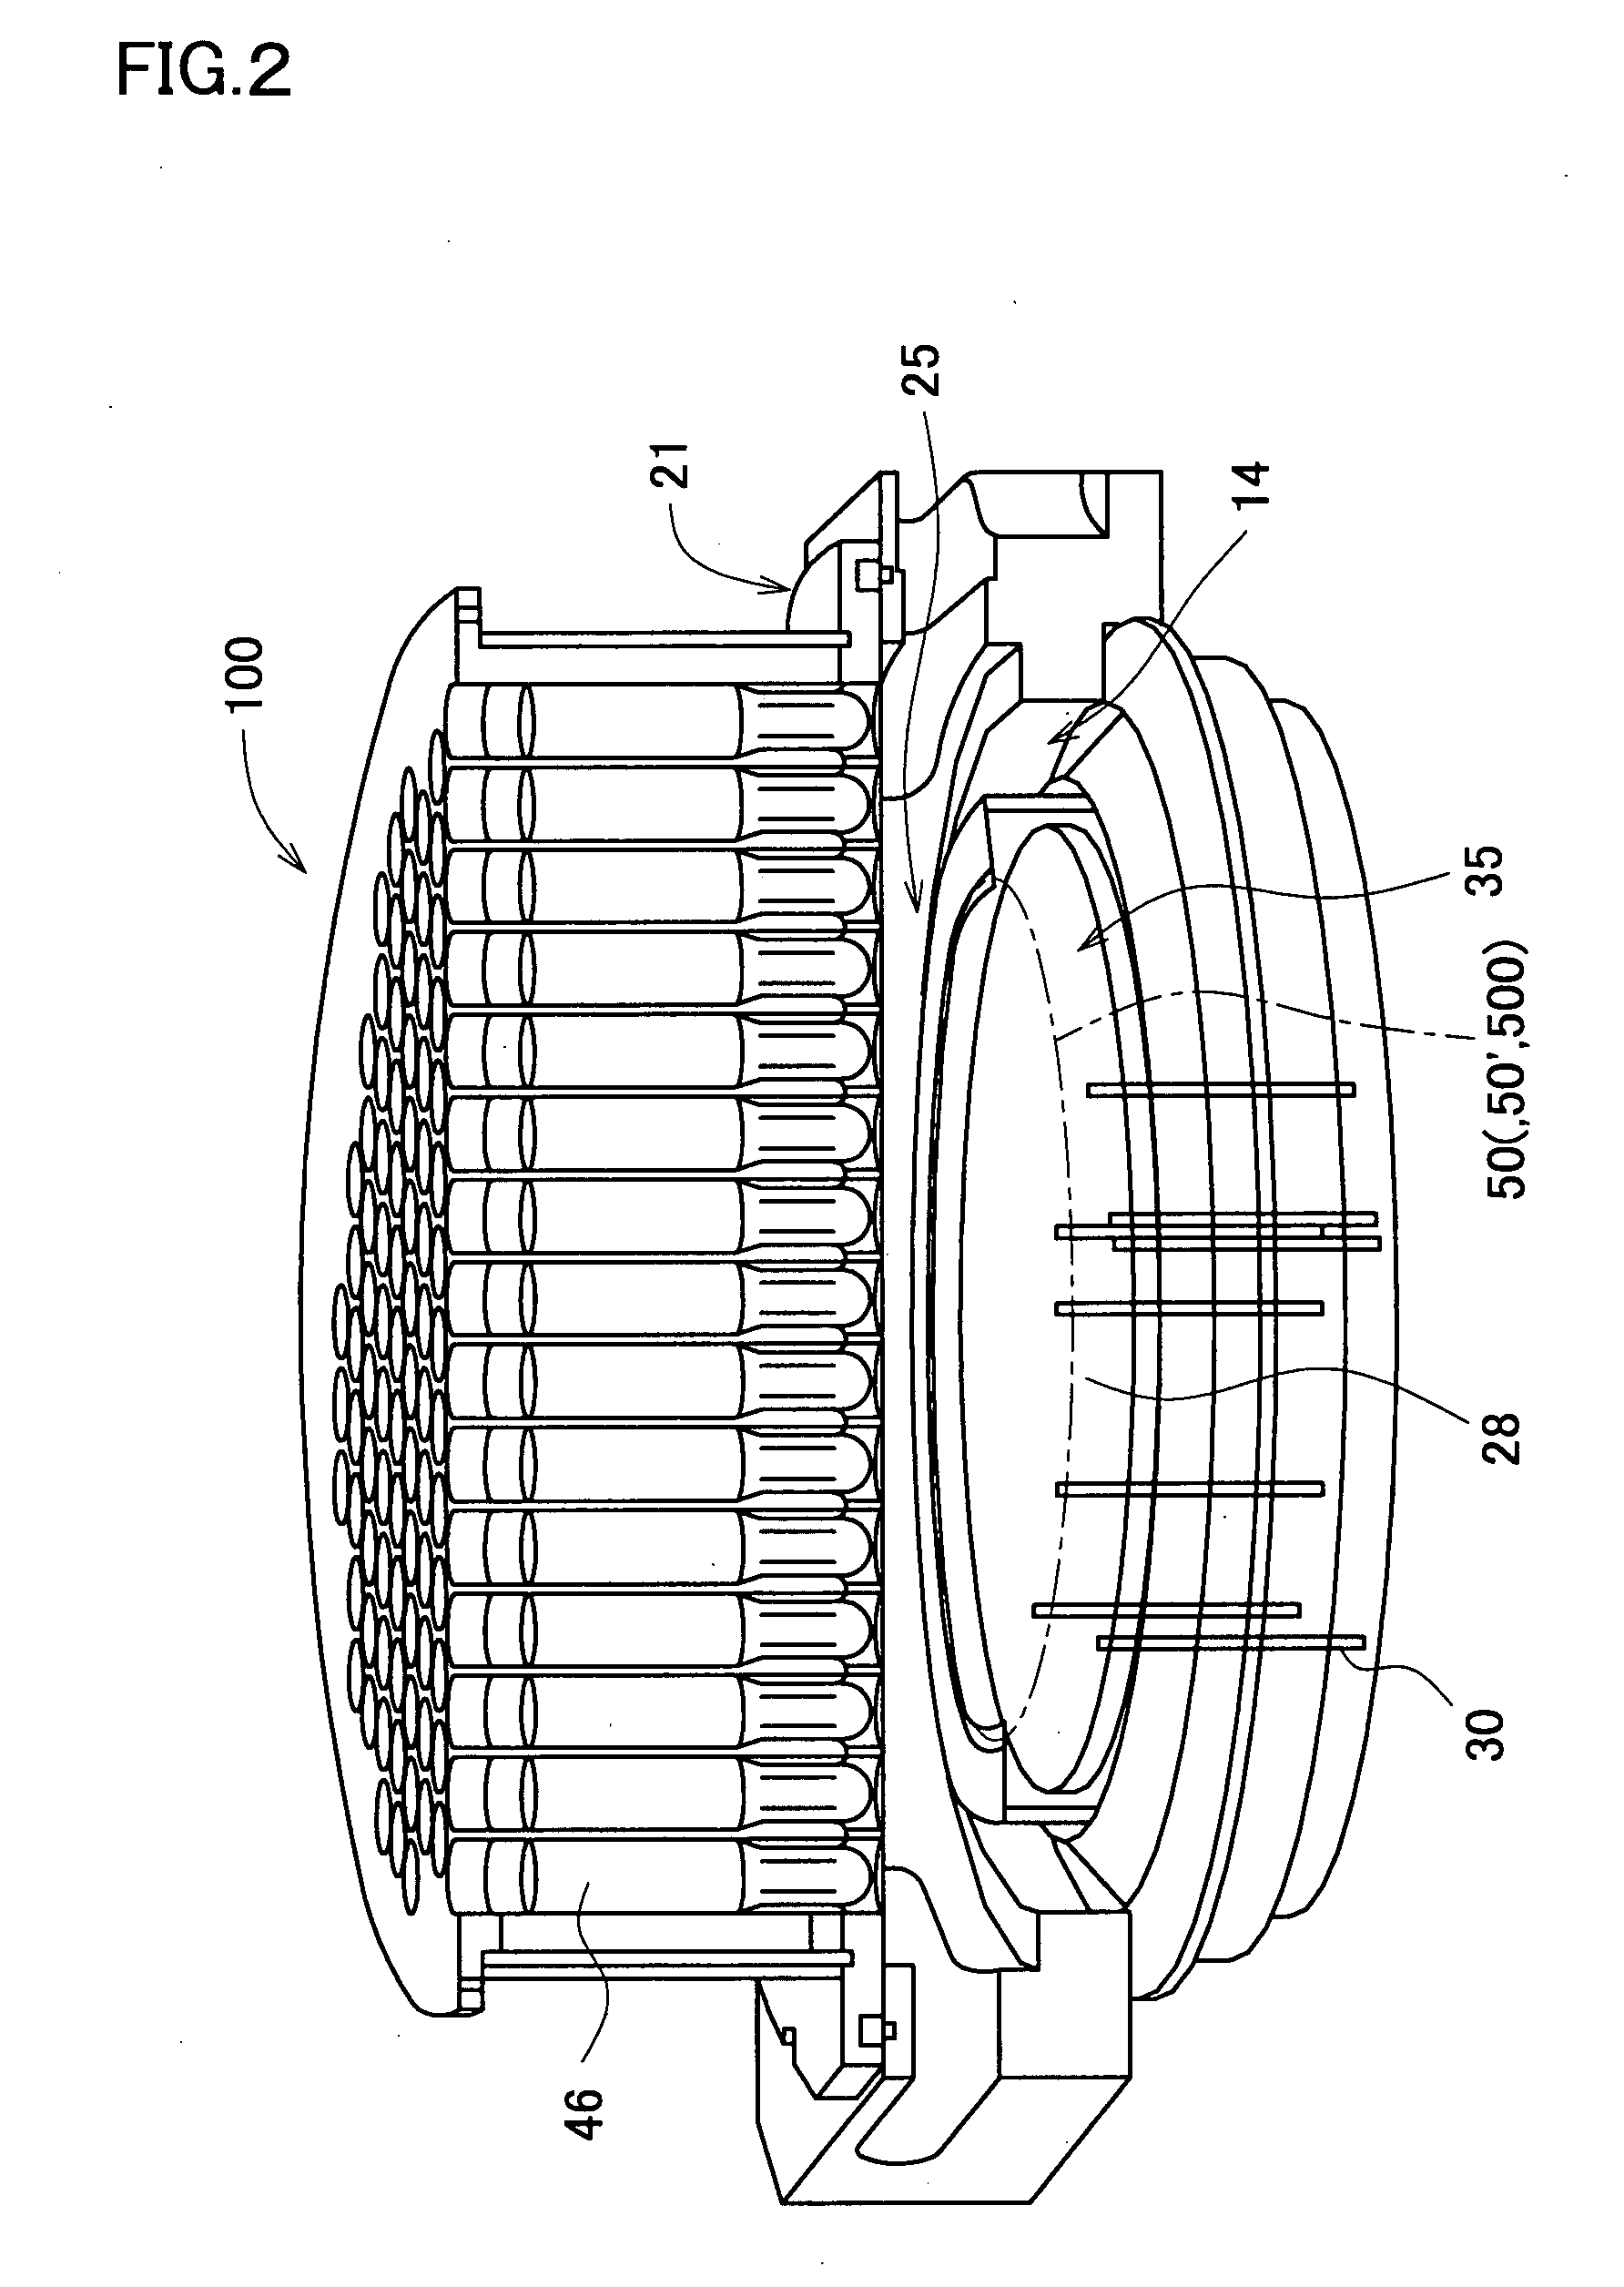 Method Of Manufacturing Soi Wafer And Thus-Manufactured Soi Wafer